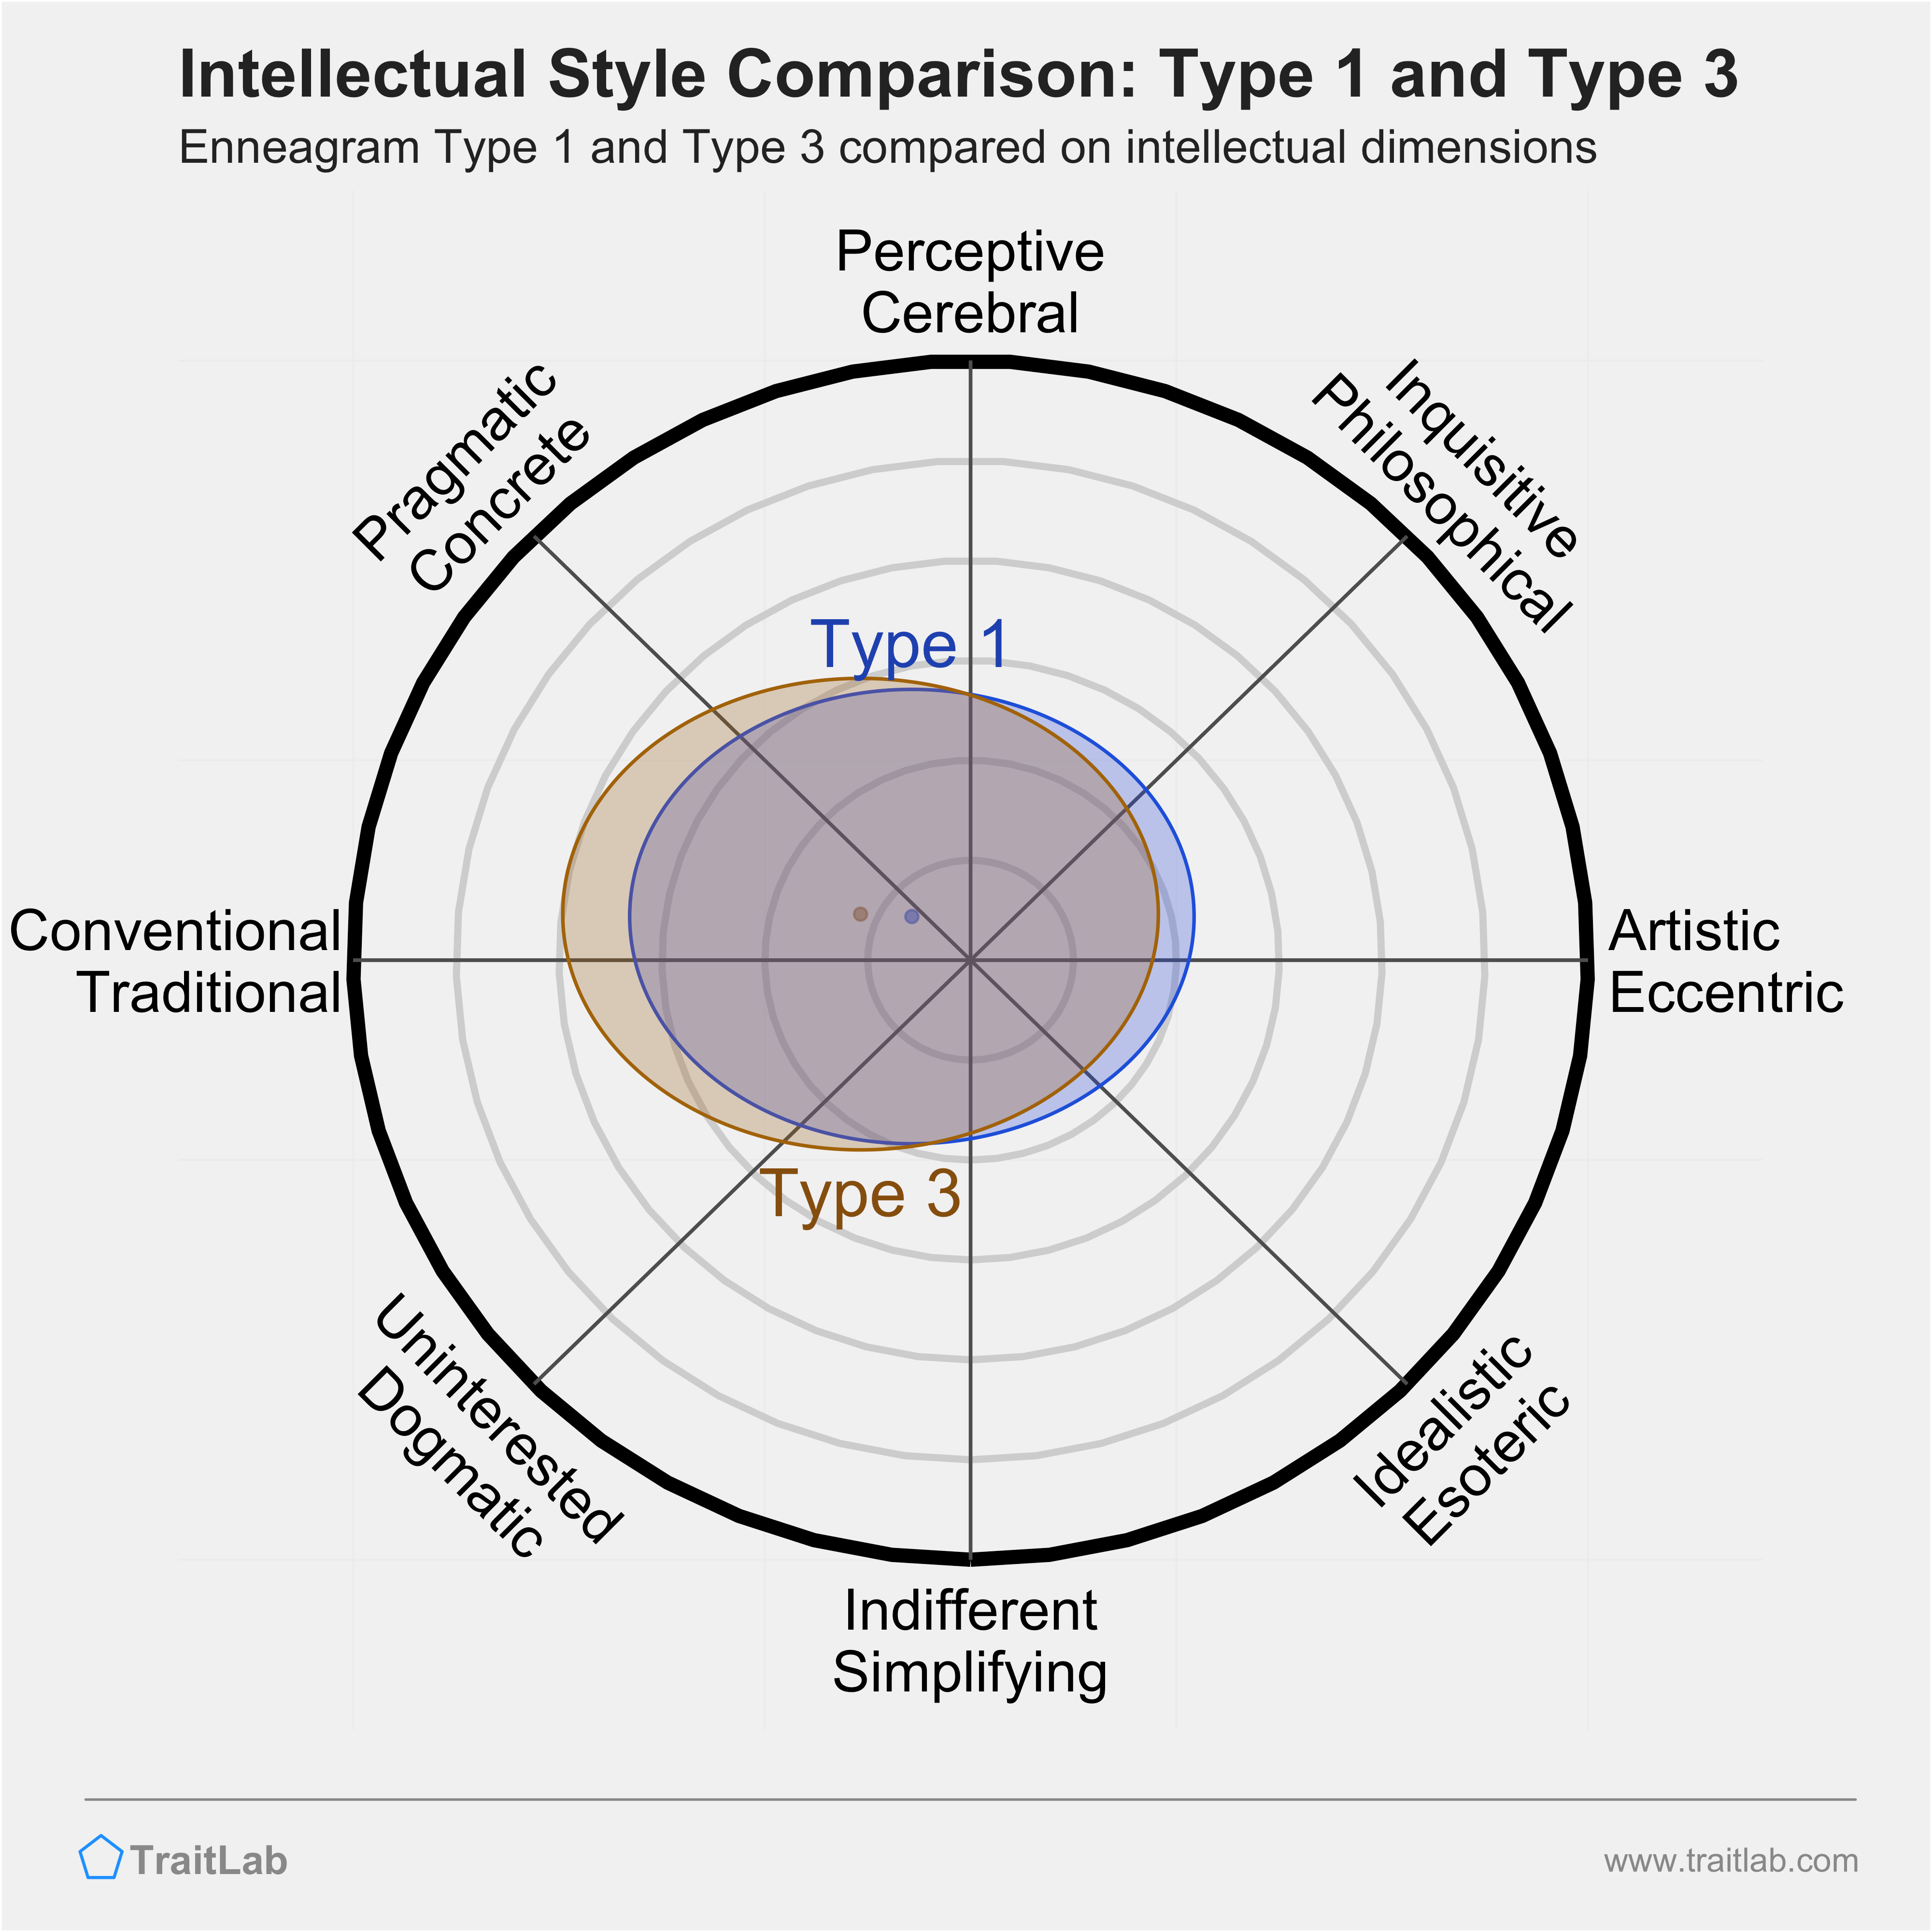 Type 1 and Type 3 comparison across intellectual dimensions